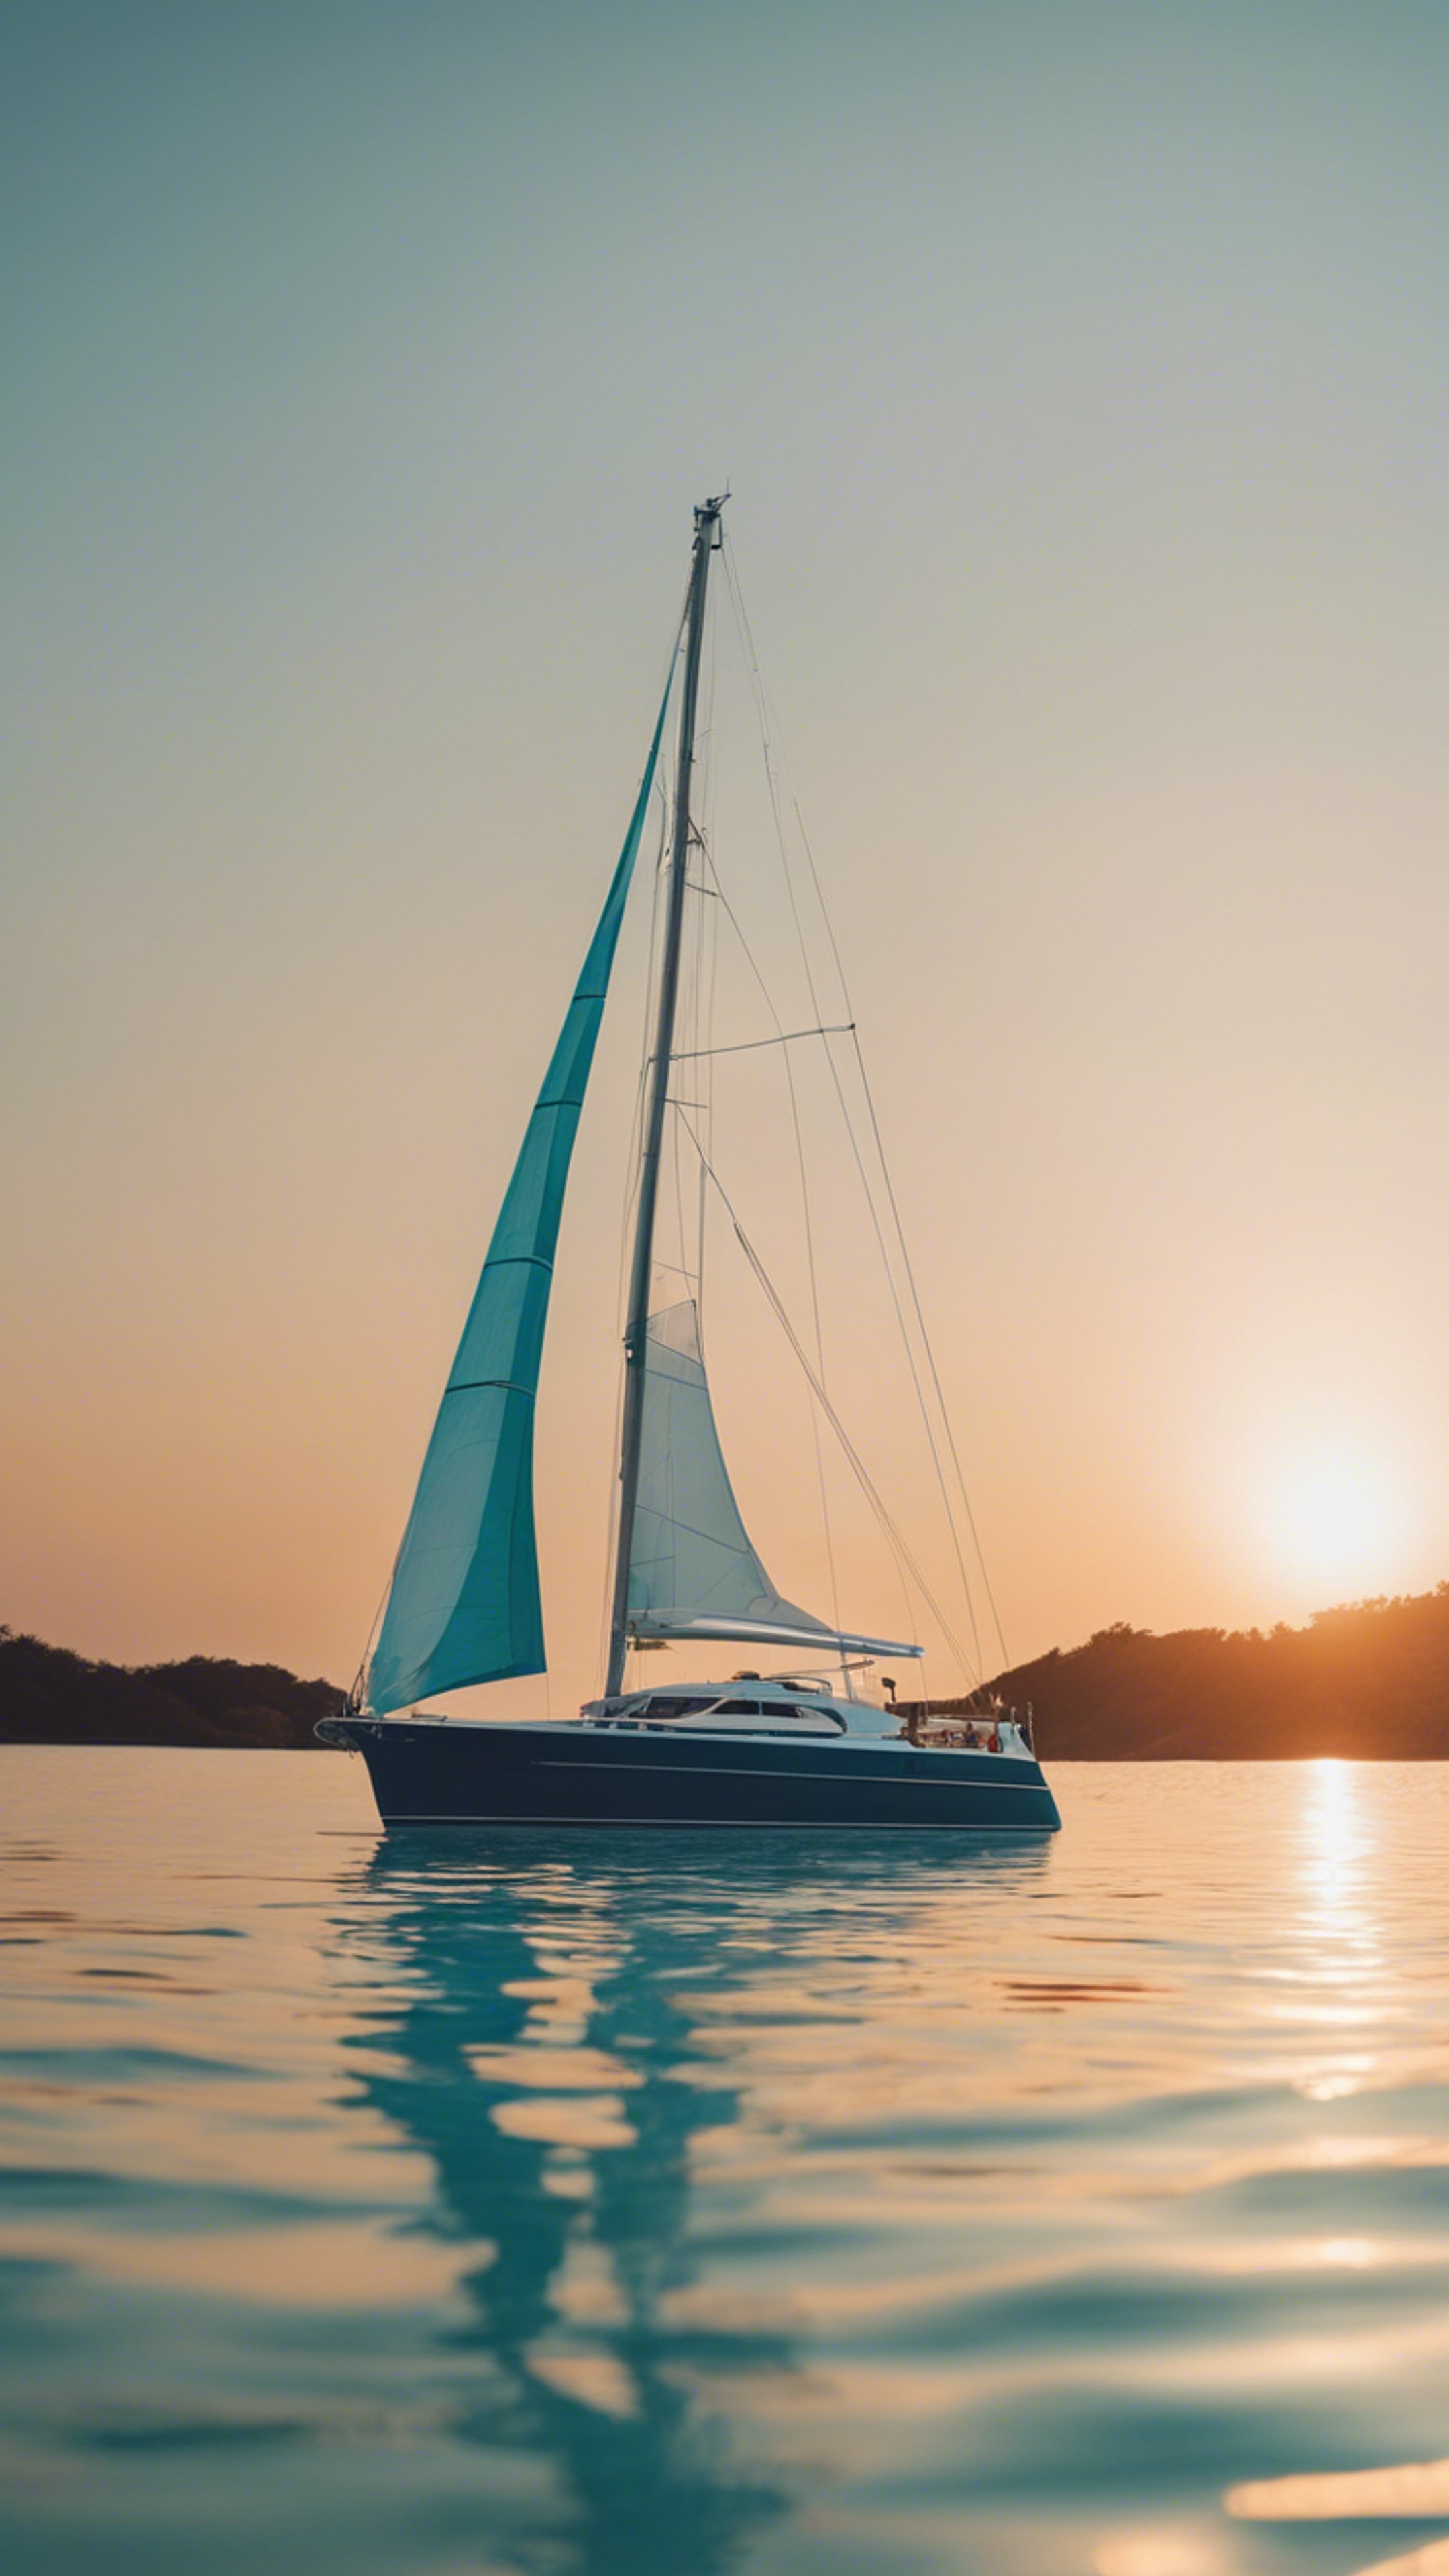 A preppy blue yacht sailing calmly on clear aquamarine waters at sunset. Wallpaper[1bfcce9f38c64176b950]